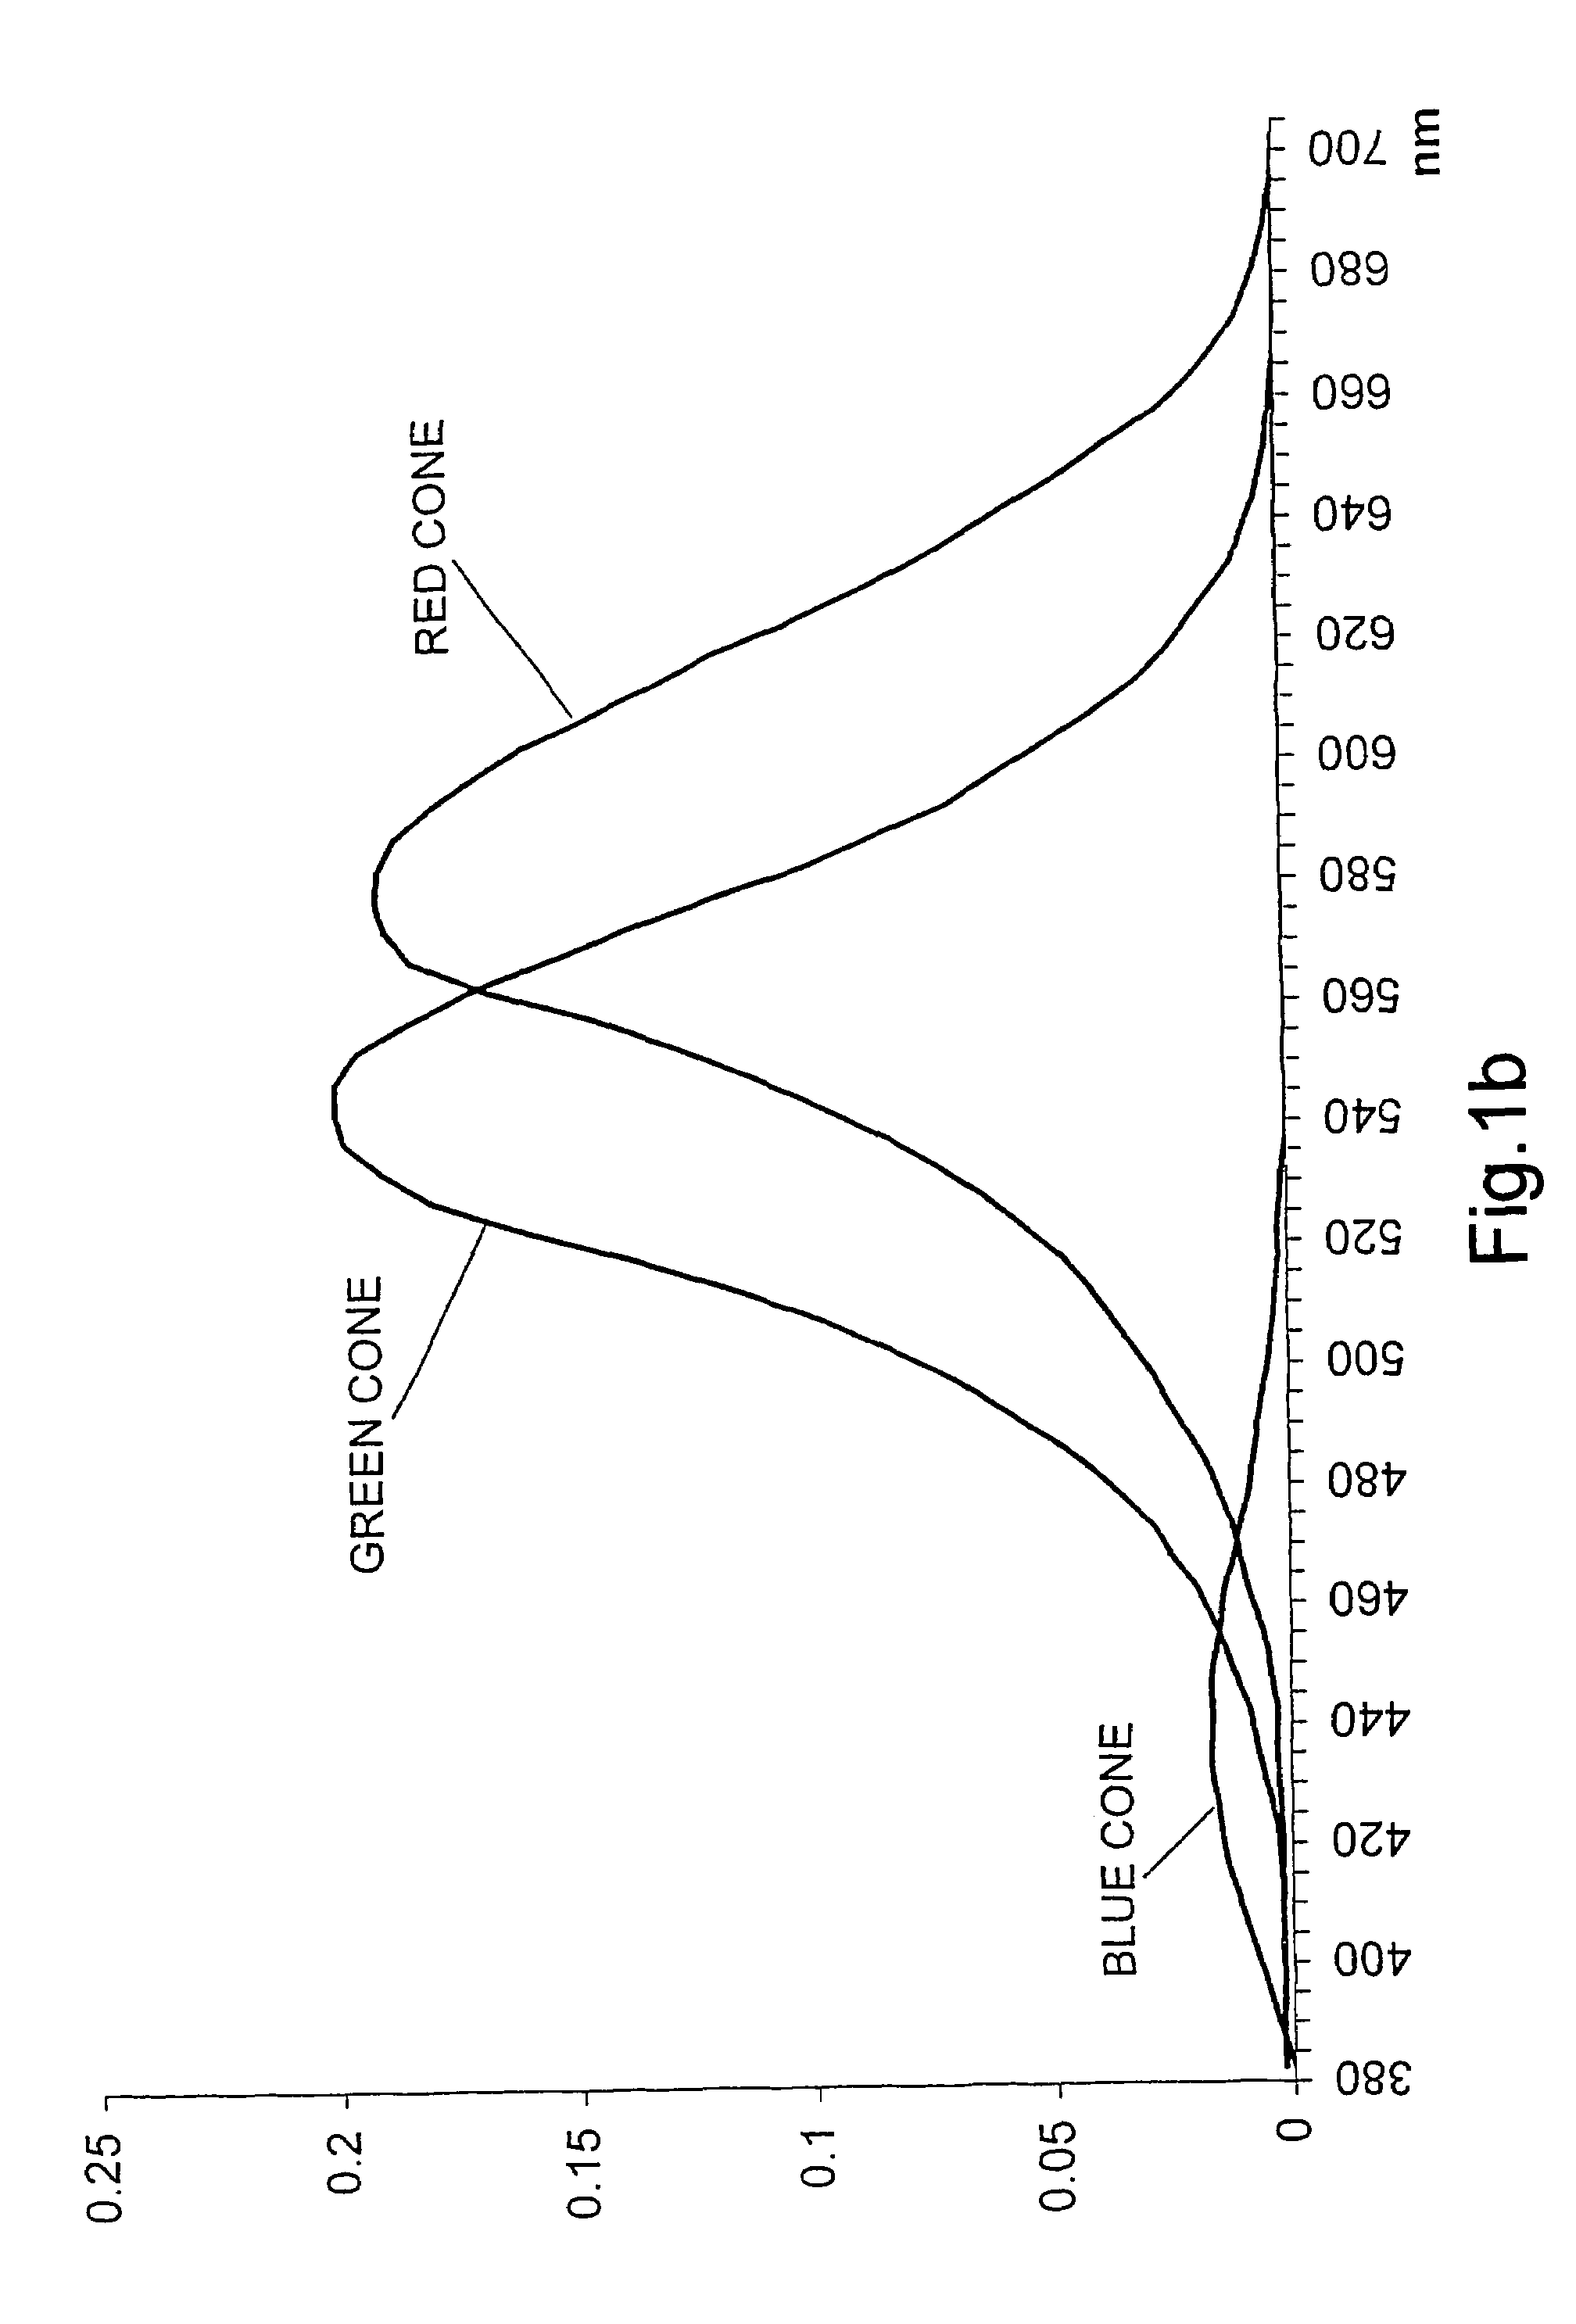 Apparatus and method for alleviation of symptoms by application of tinted light